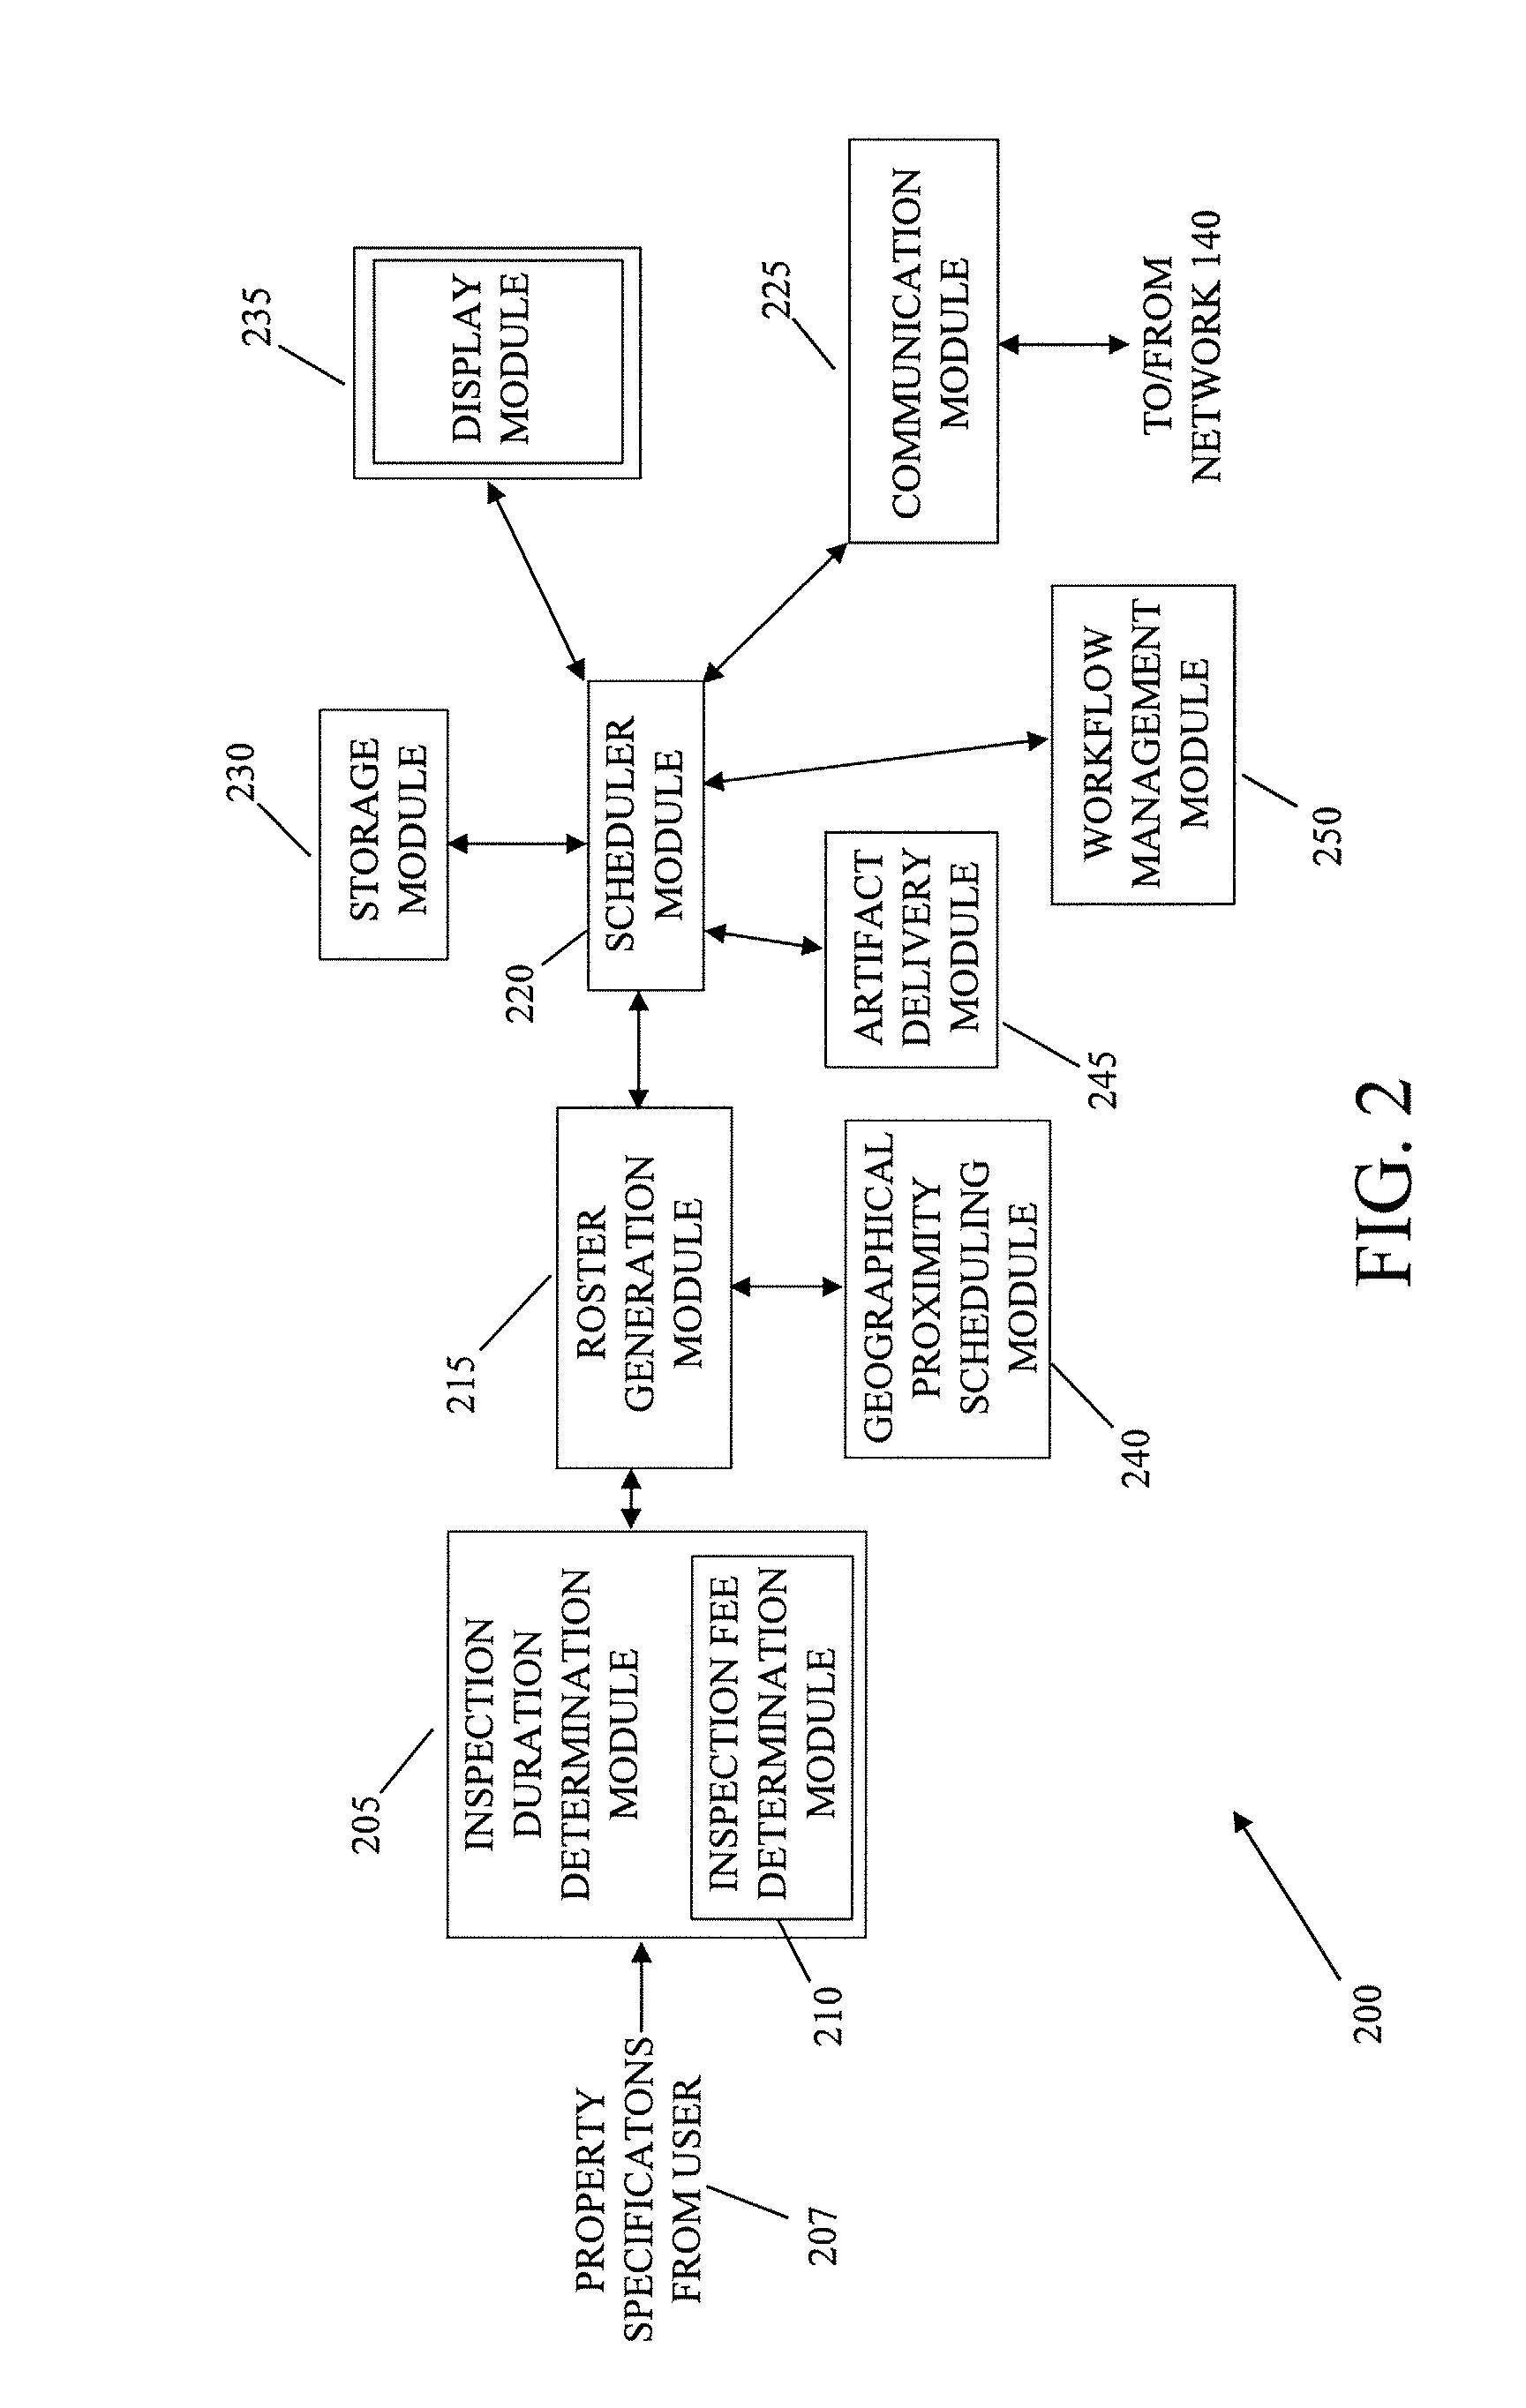 Parameter-based appointment scheduling system and method